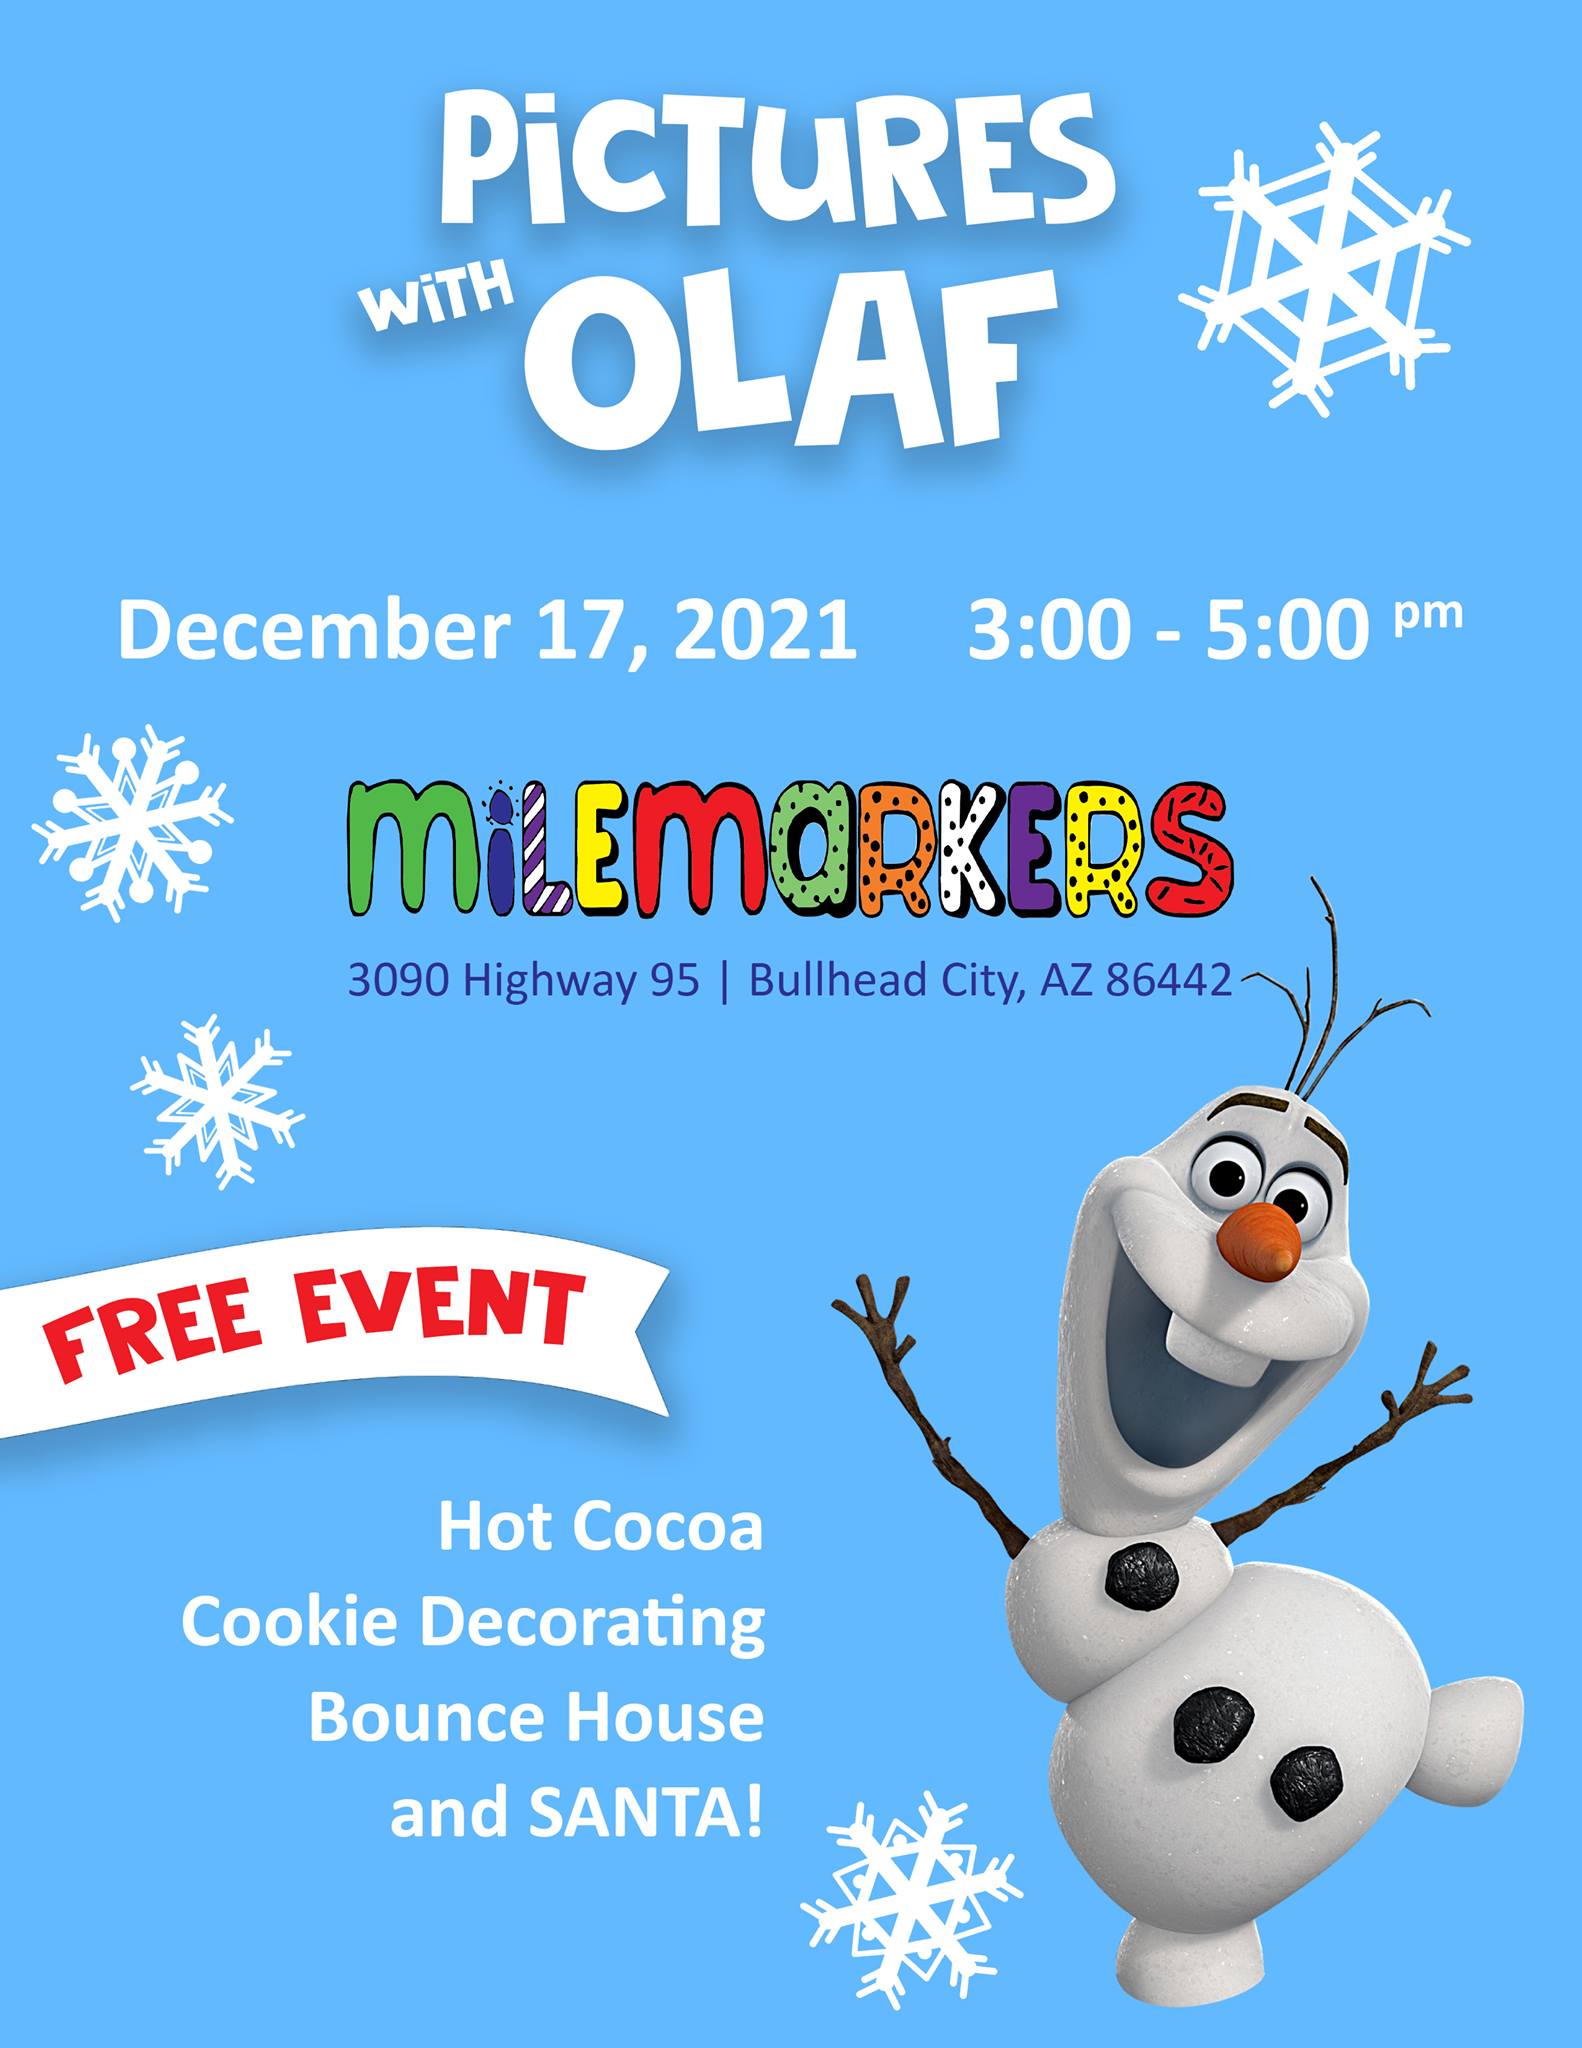 Milemarkers presents Pictures with OLAF!